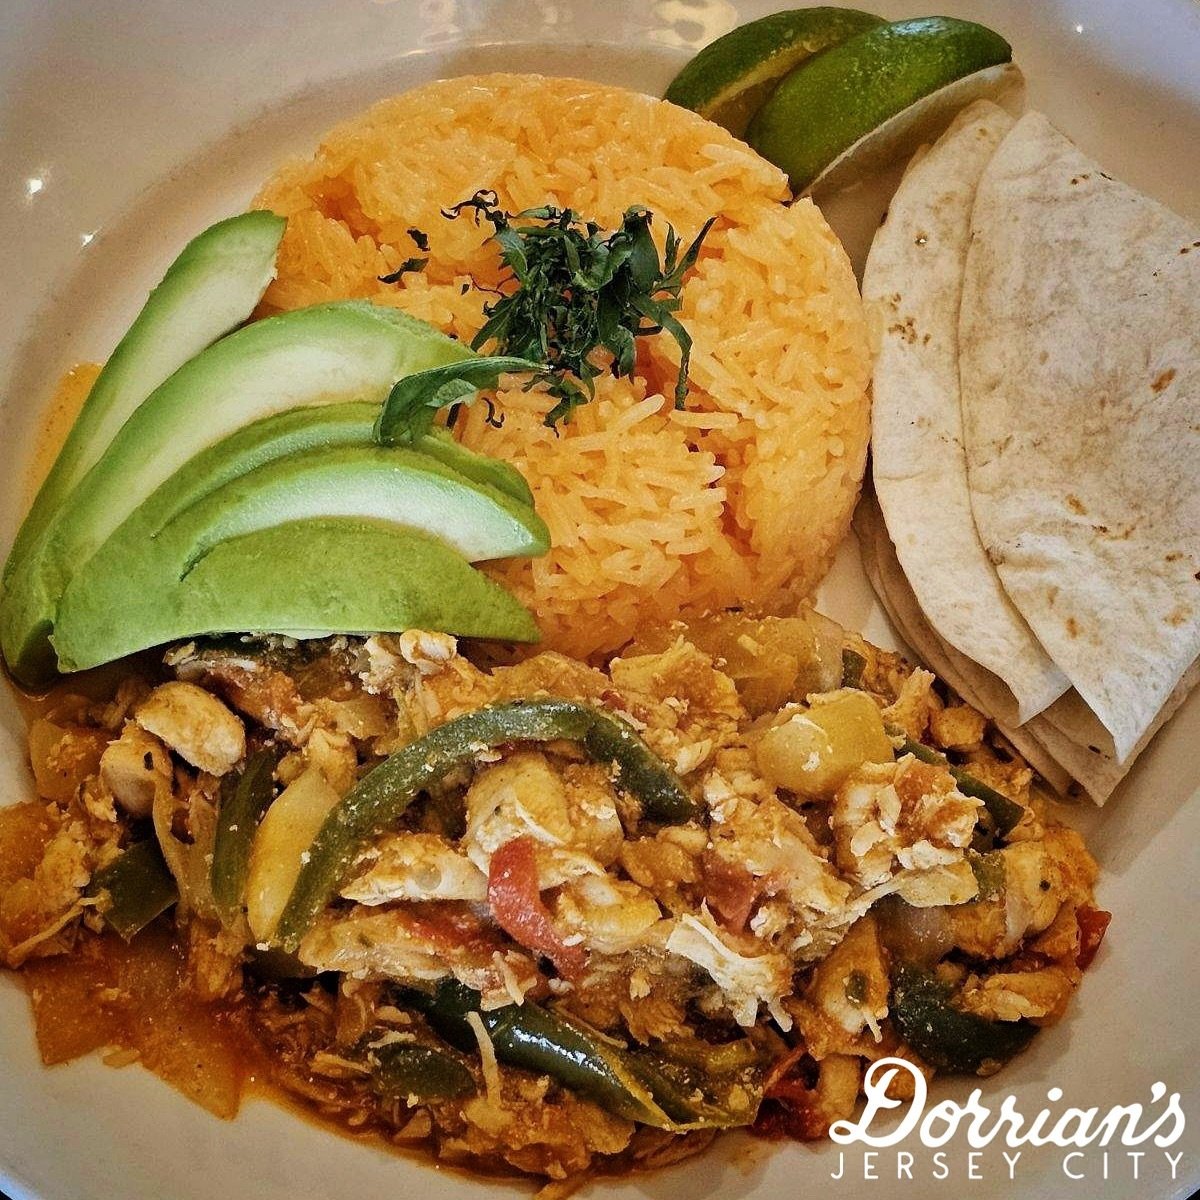 New menu item! Chicken Fajitas. We&rsquo;ve added many great new dishes at Dorrian&rsquo;s, check out our full menu online.